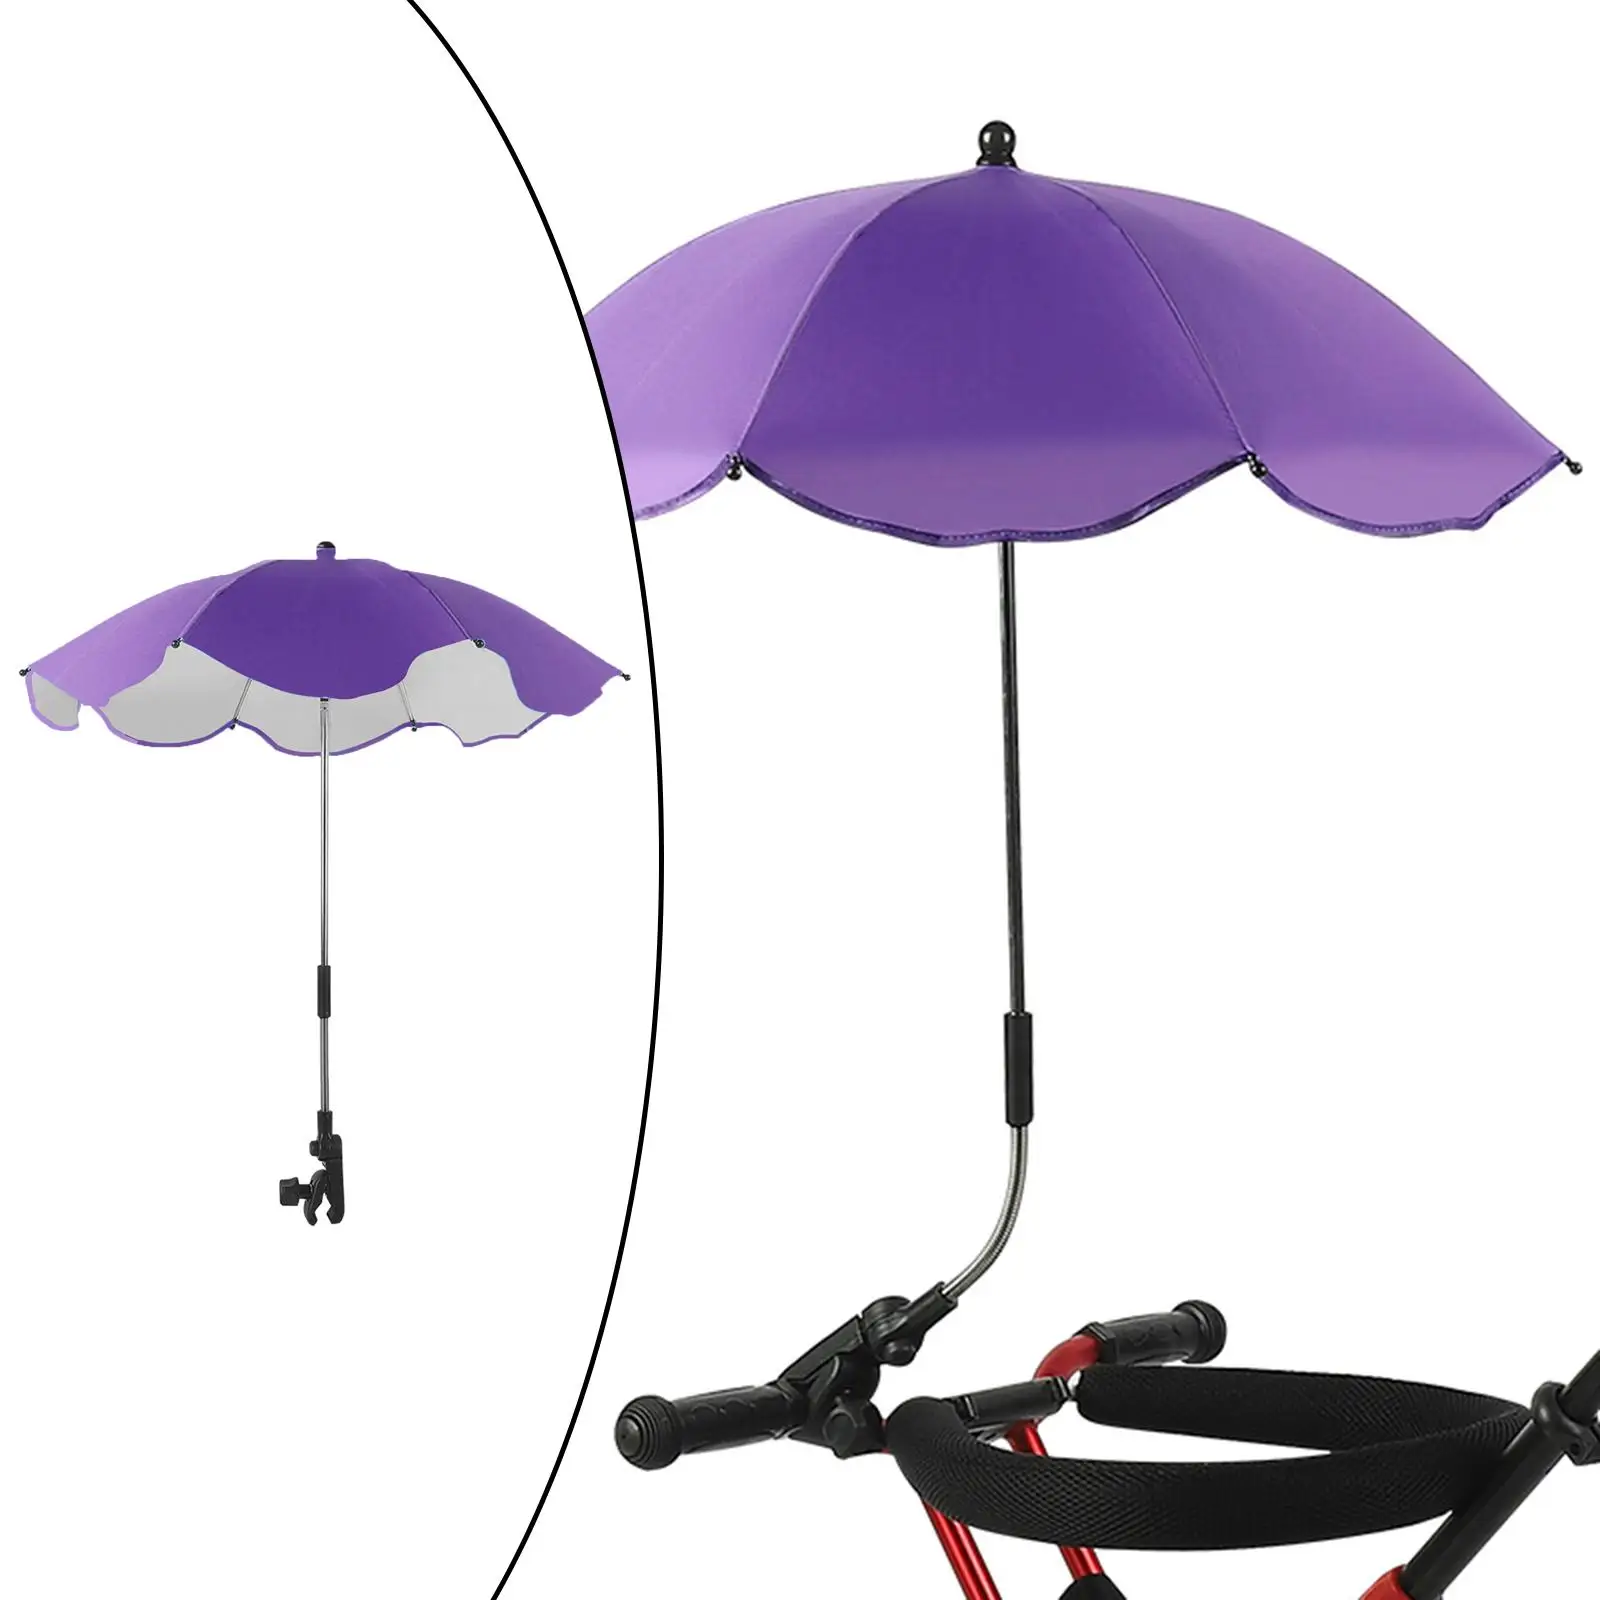 Clamp On UV Protection Baby Stroller Umbrella Buggy Pram Pushchair Accessories Large Parasol Rain Protecter Canopy Cover